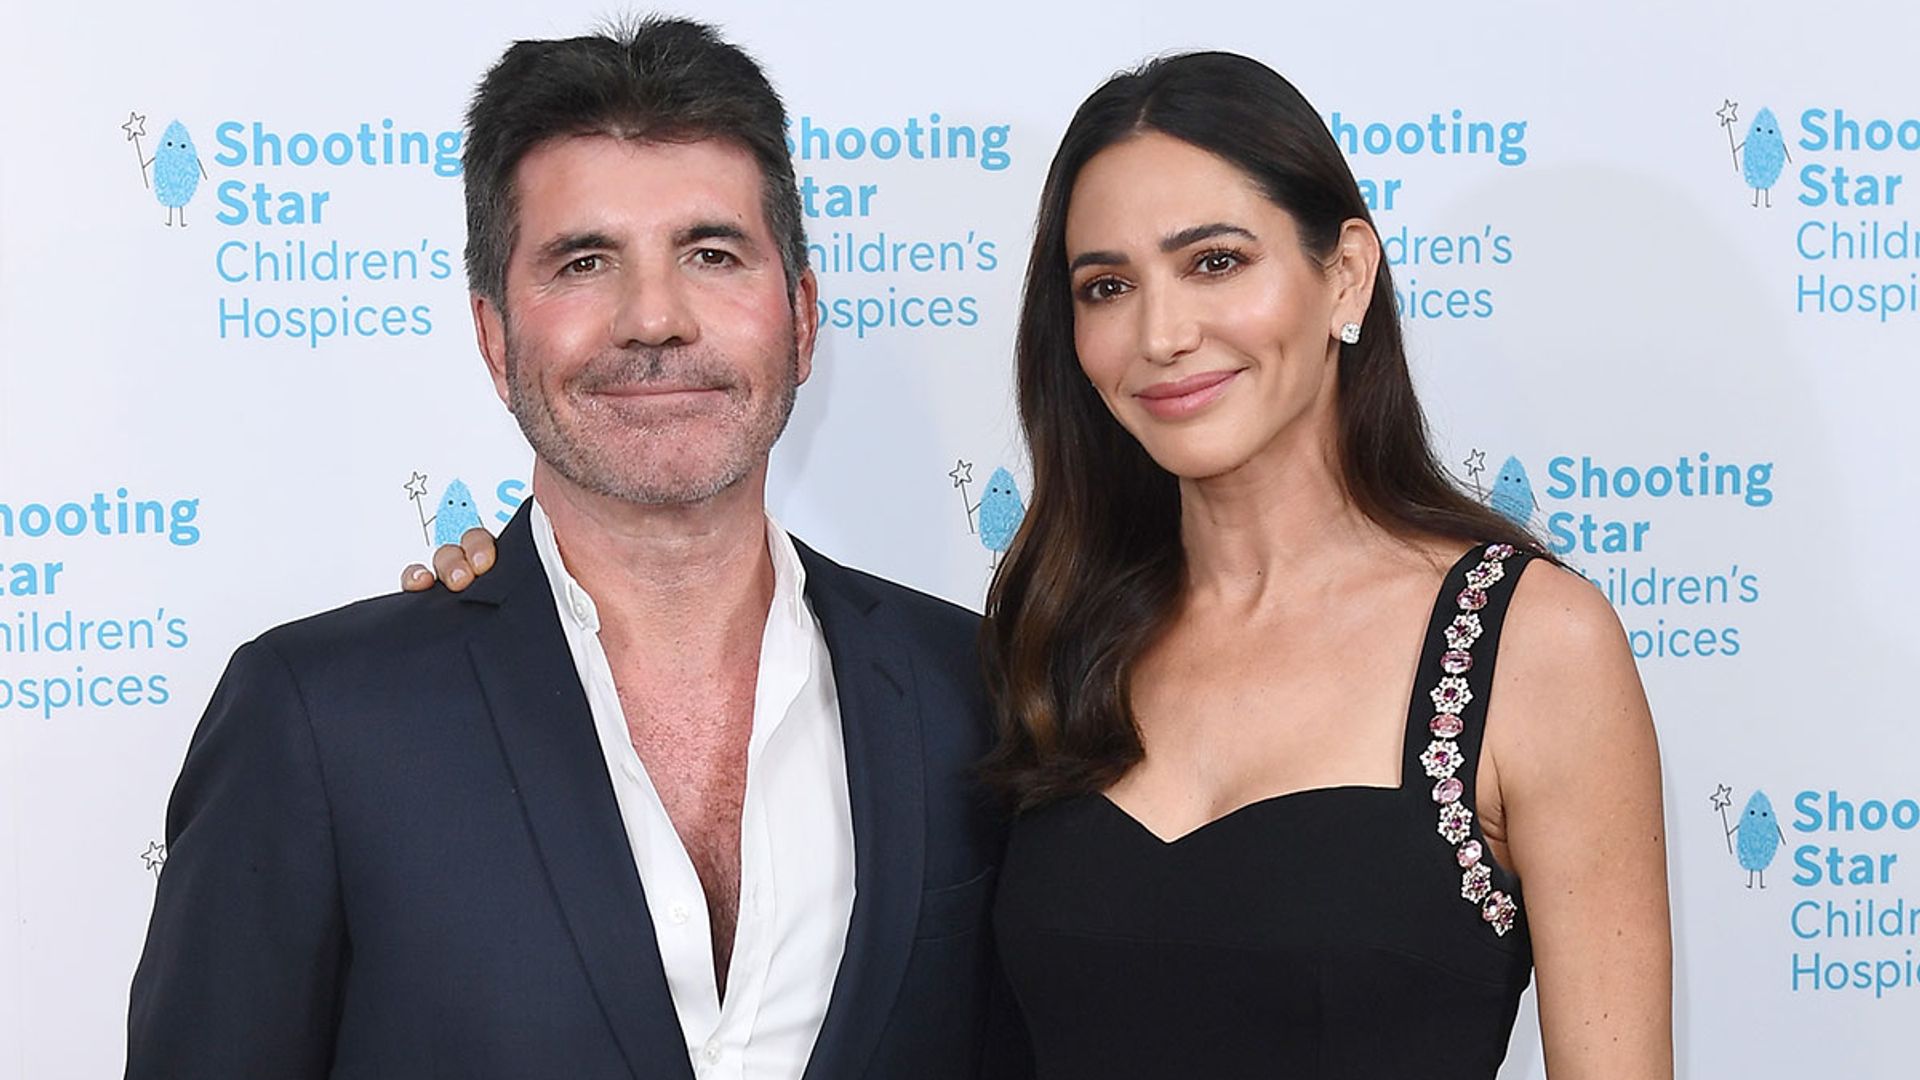 Simon Cowell and Lauren Silverman are engaged after romantic Barbados proposal - details